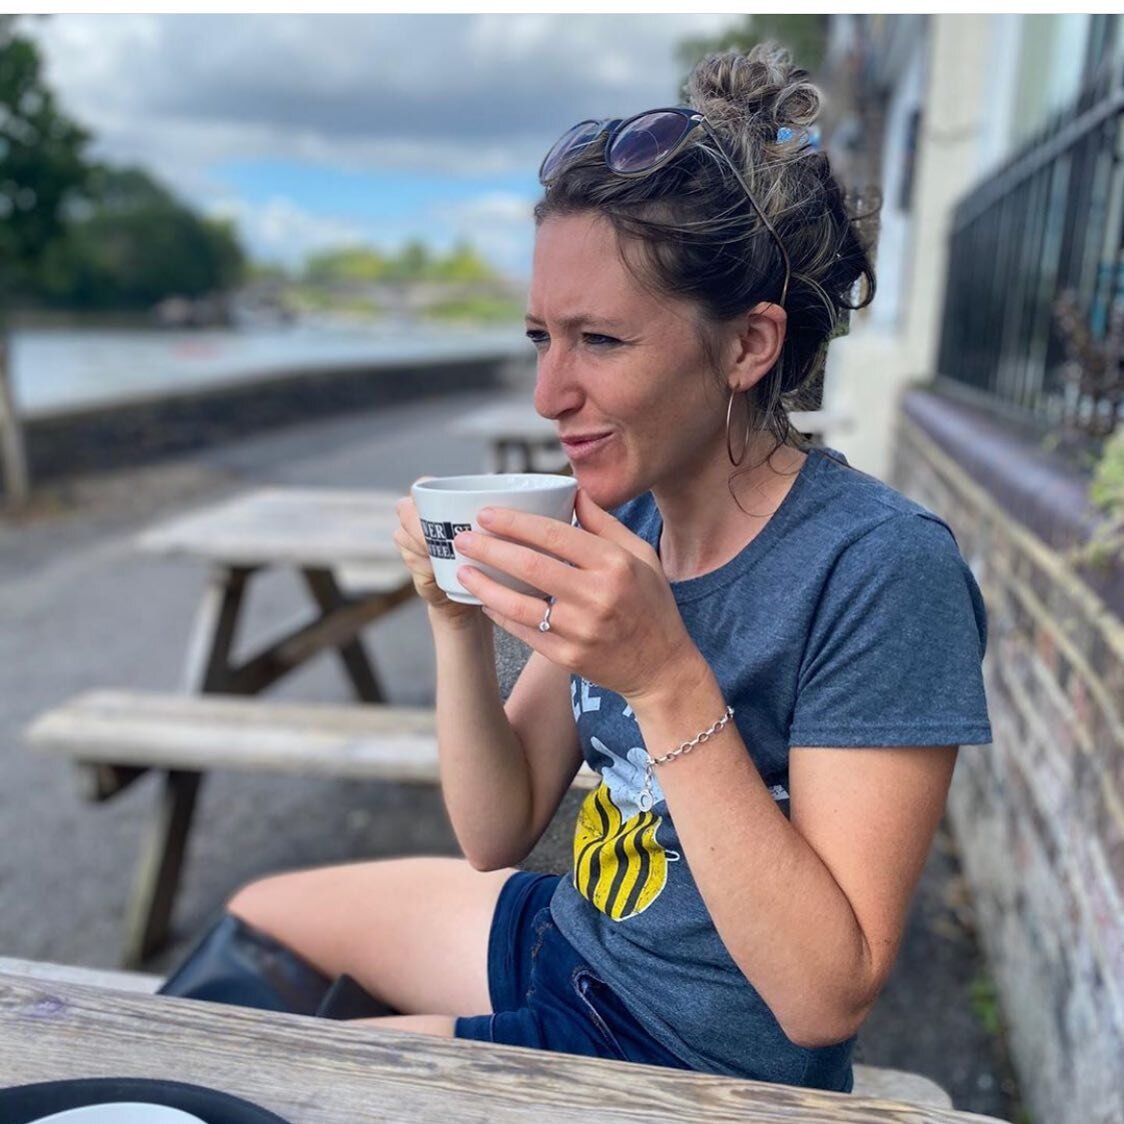 Our @hopevirgo_ is blogging about finding the right therapist this week. Hop over to her insta to read her thoughts and tips.